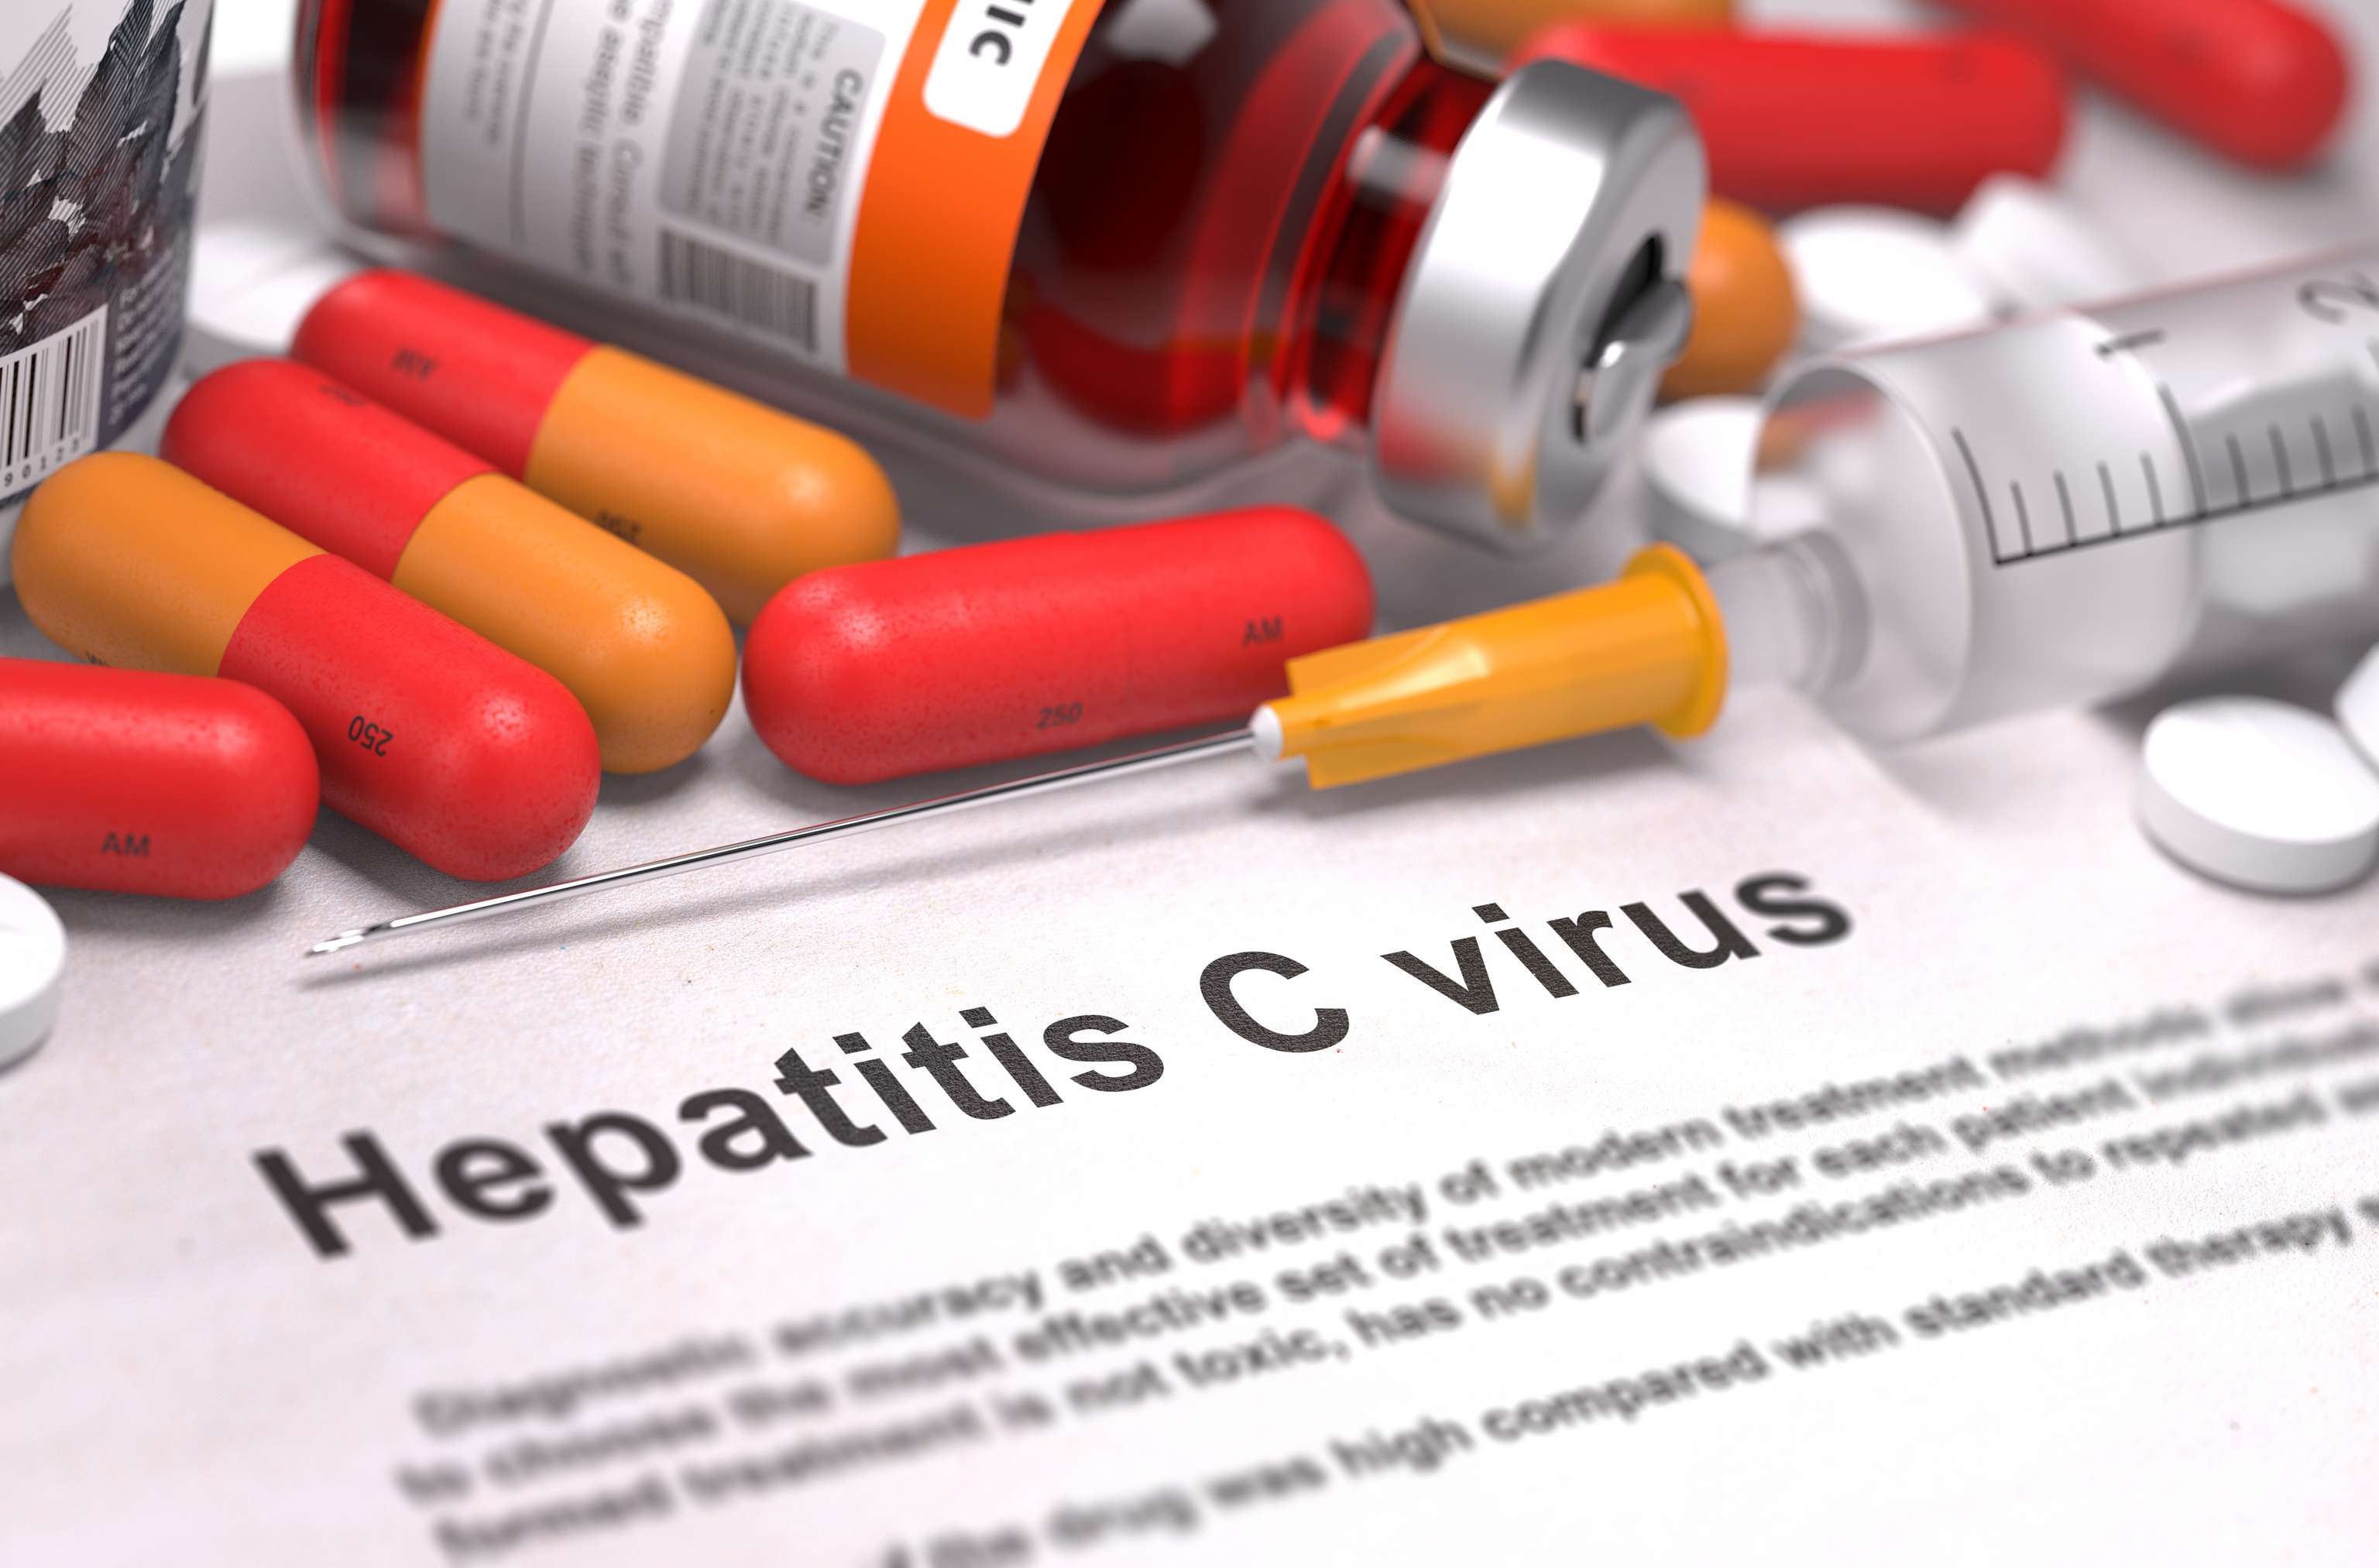 Antiviral treatment for hepatitis C with success?